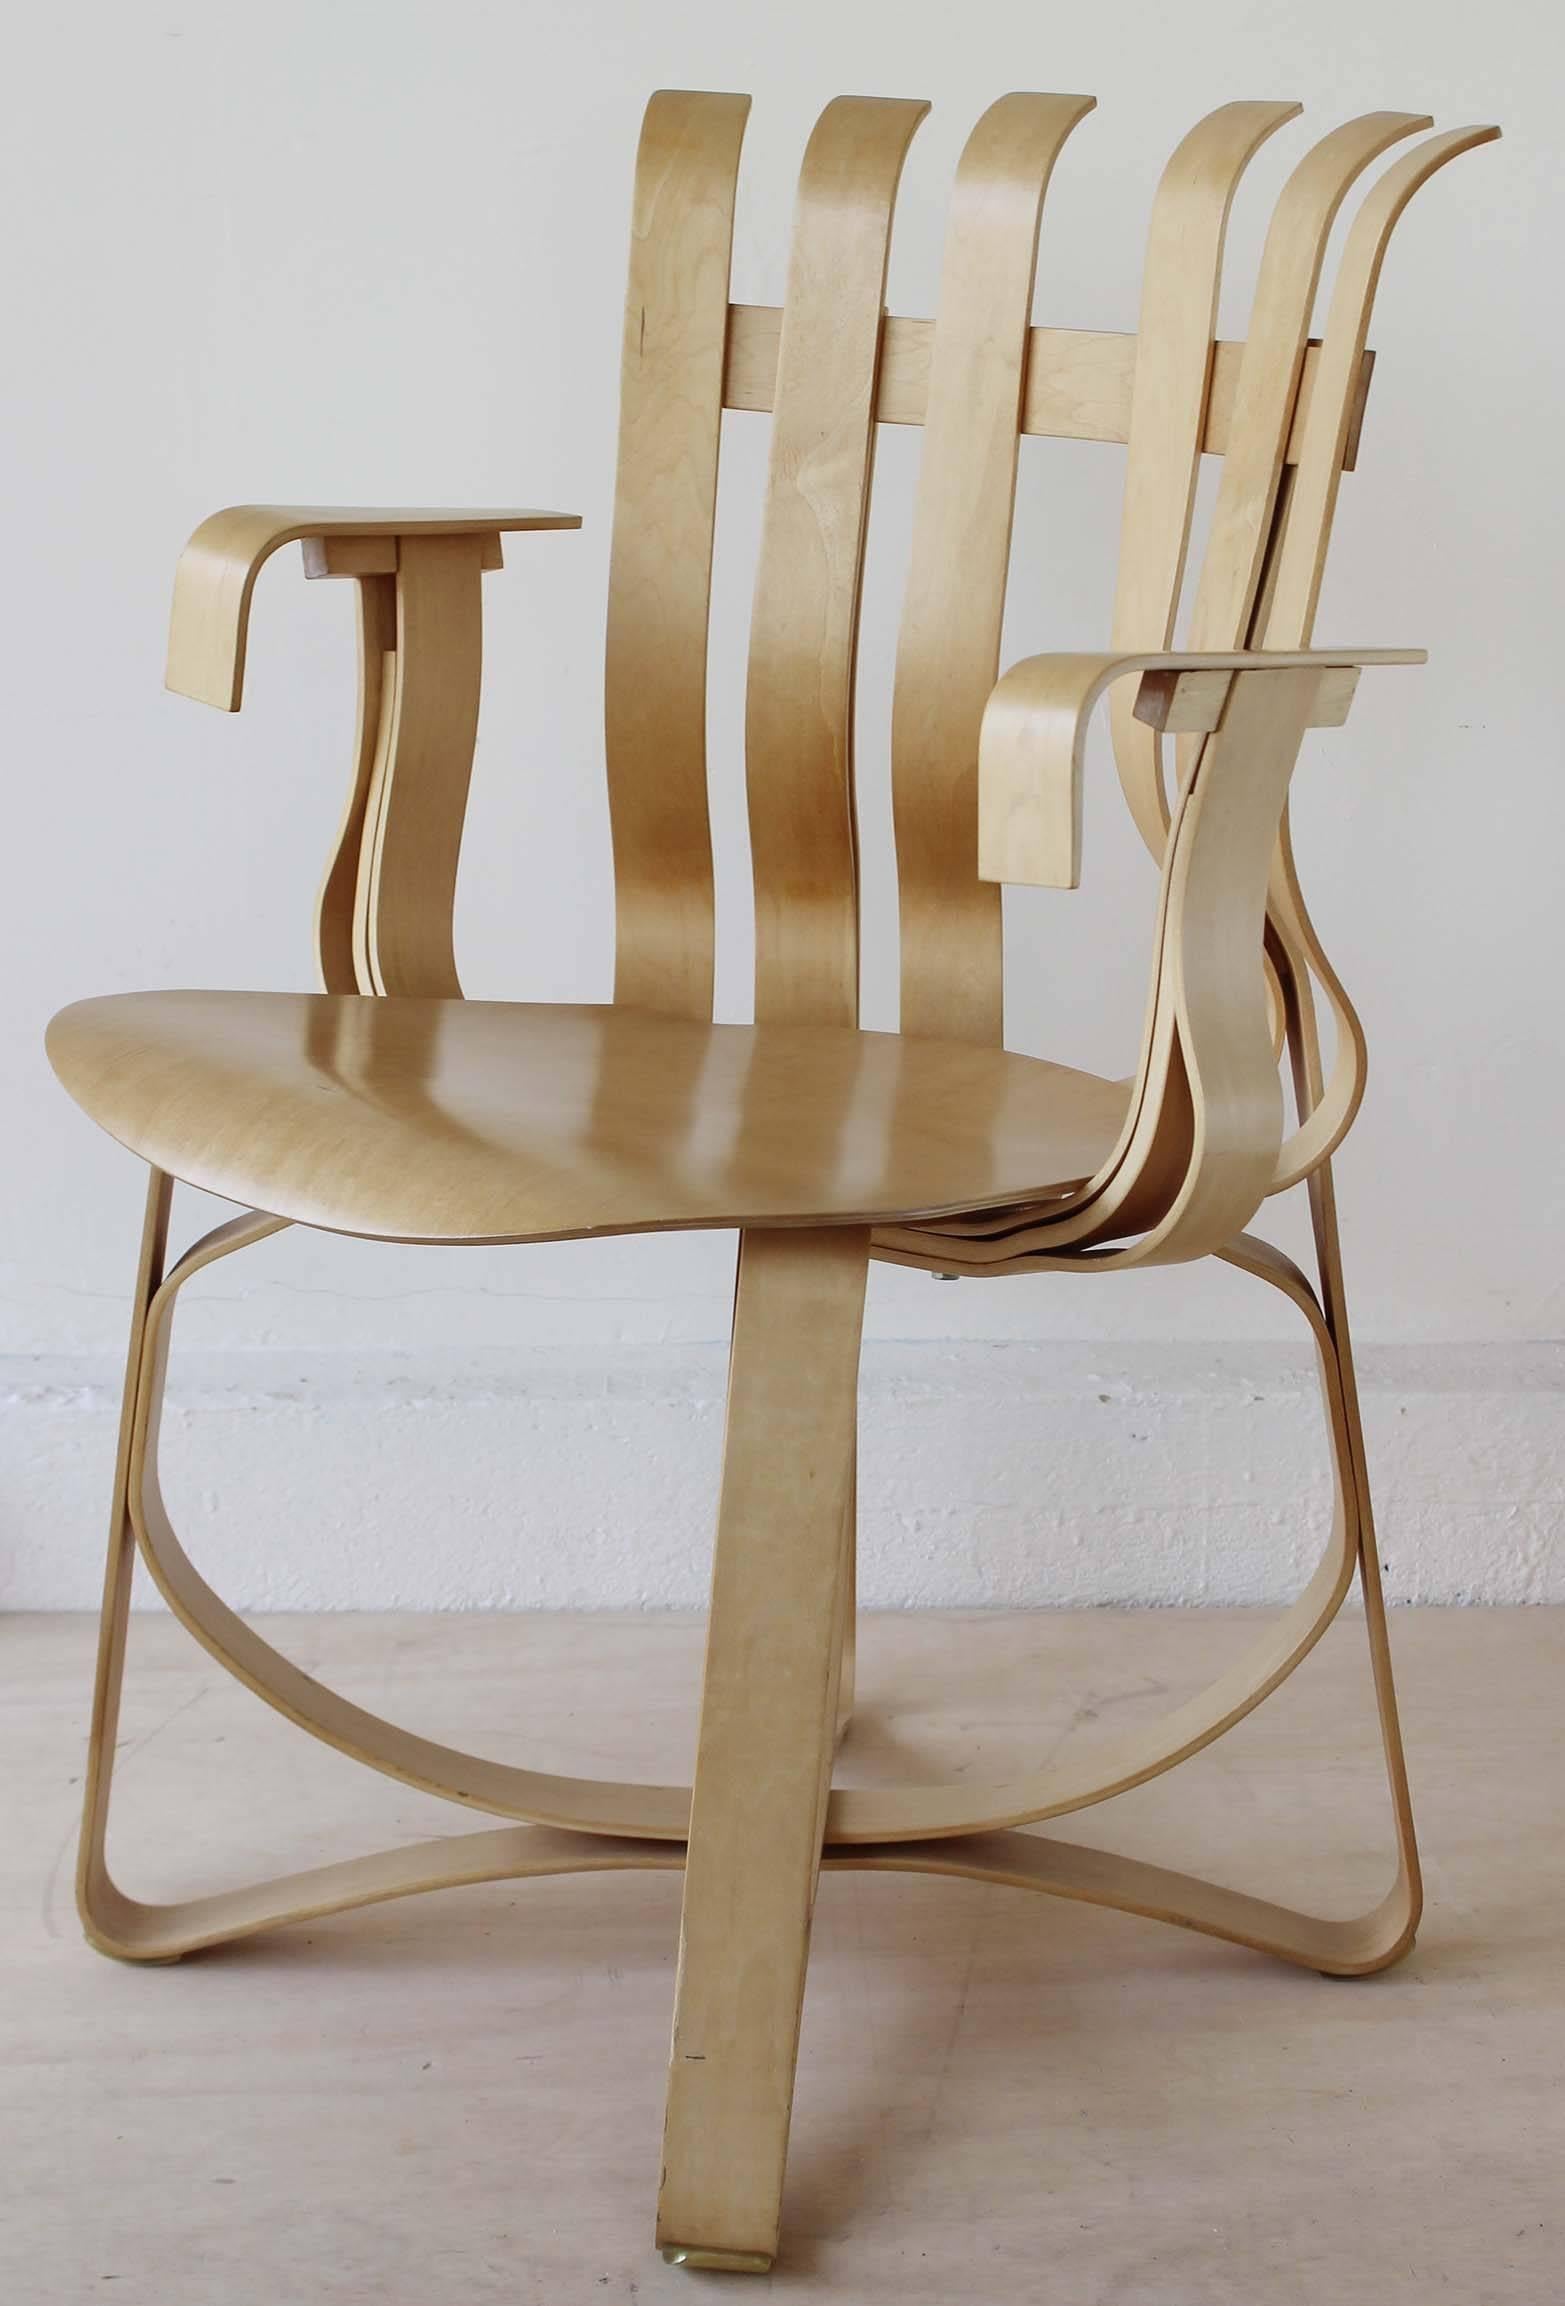 Inspired by the strength of apple crates he grew up with, in 1990 Frank Gehry designed this uniquely beautiful bentwood chair for Knoll.